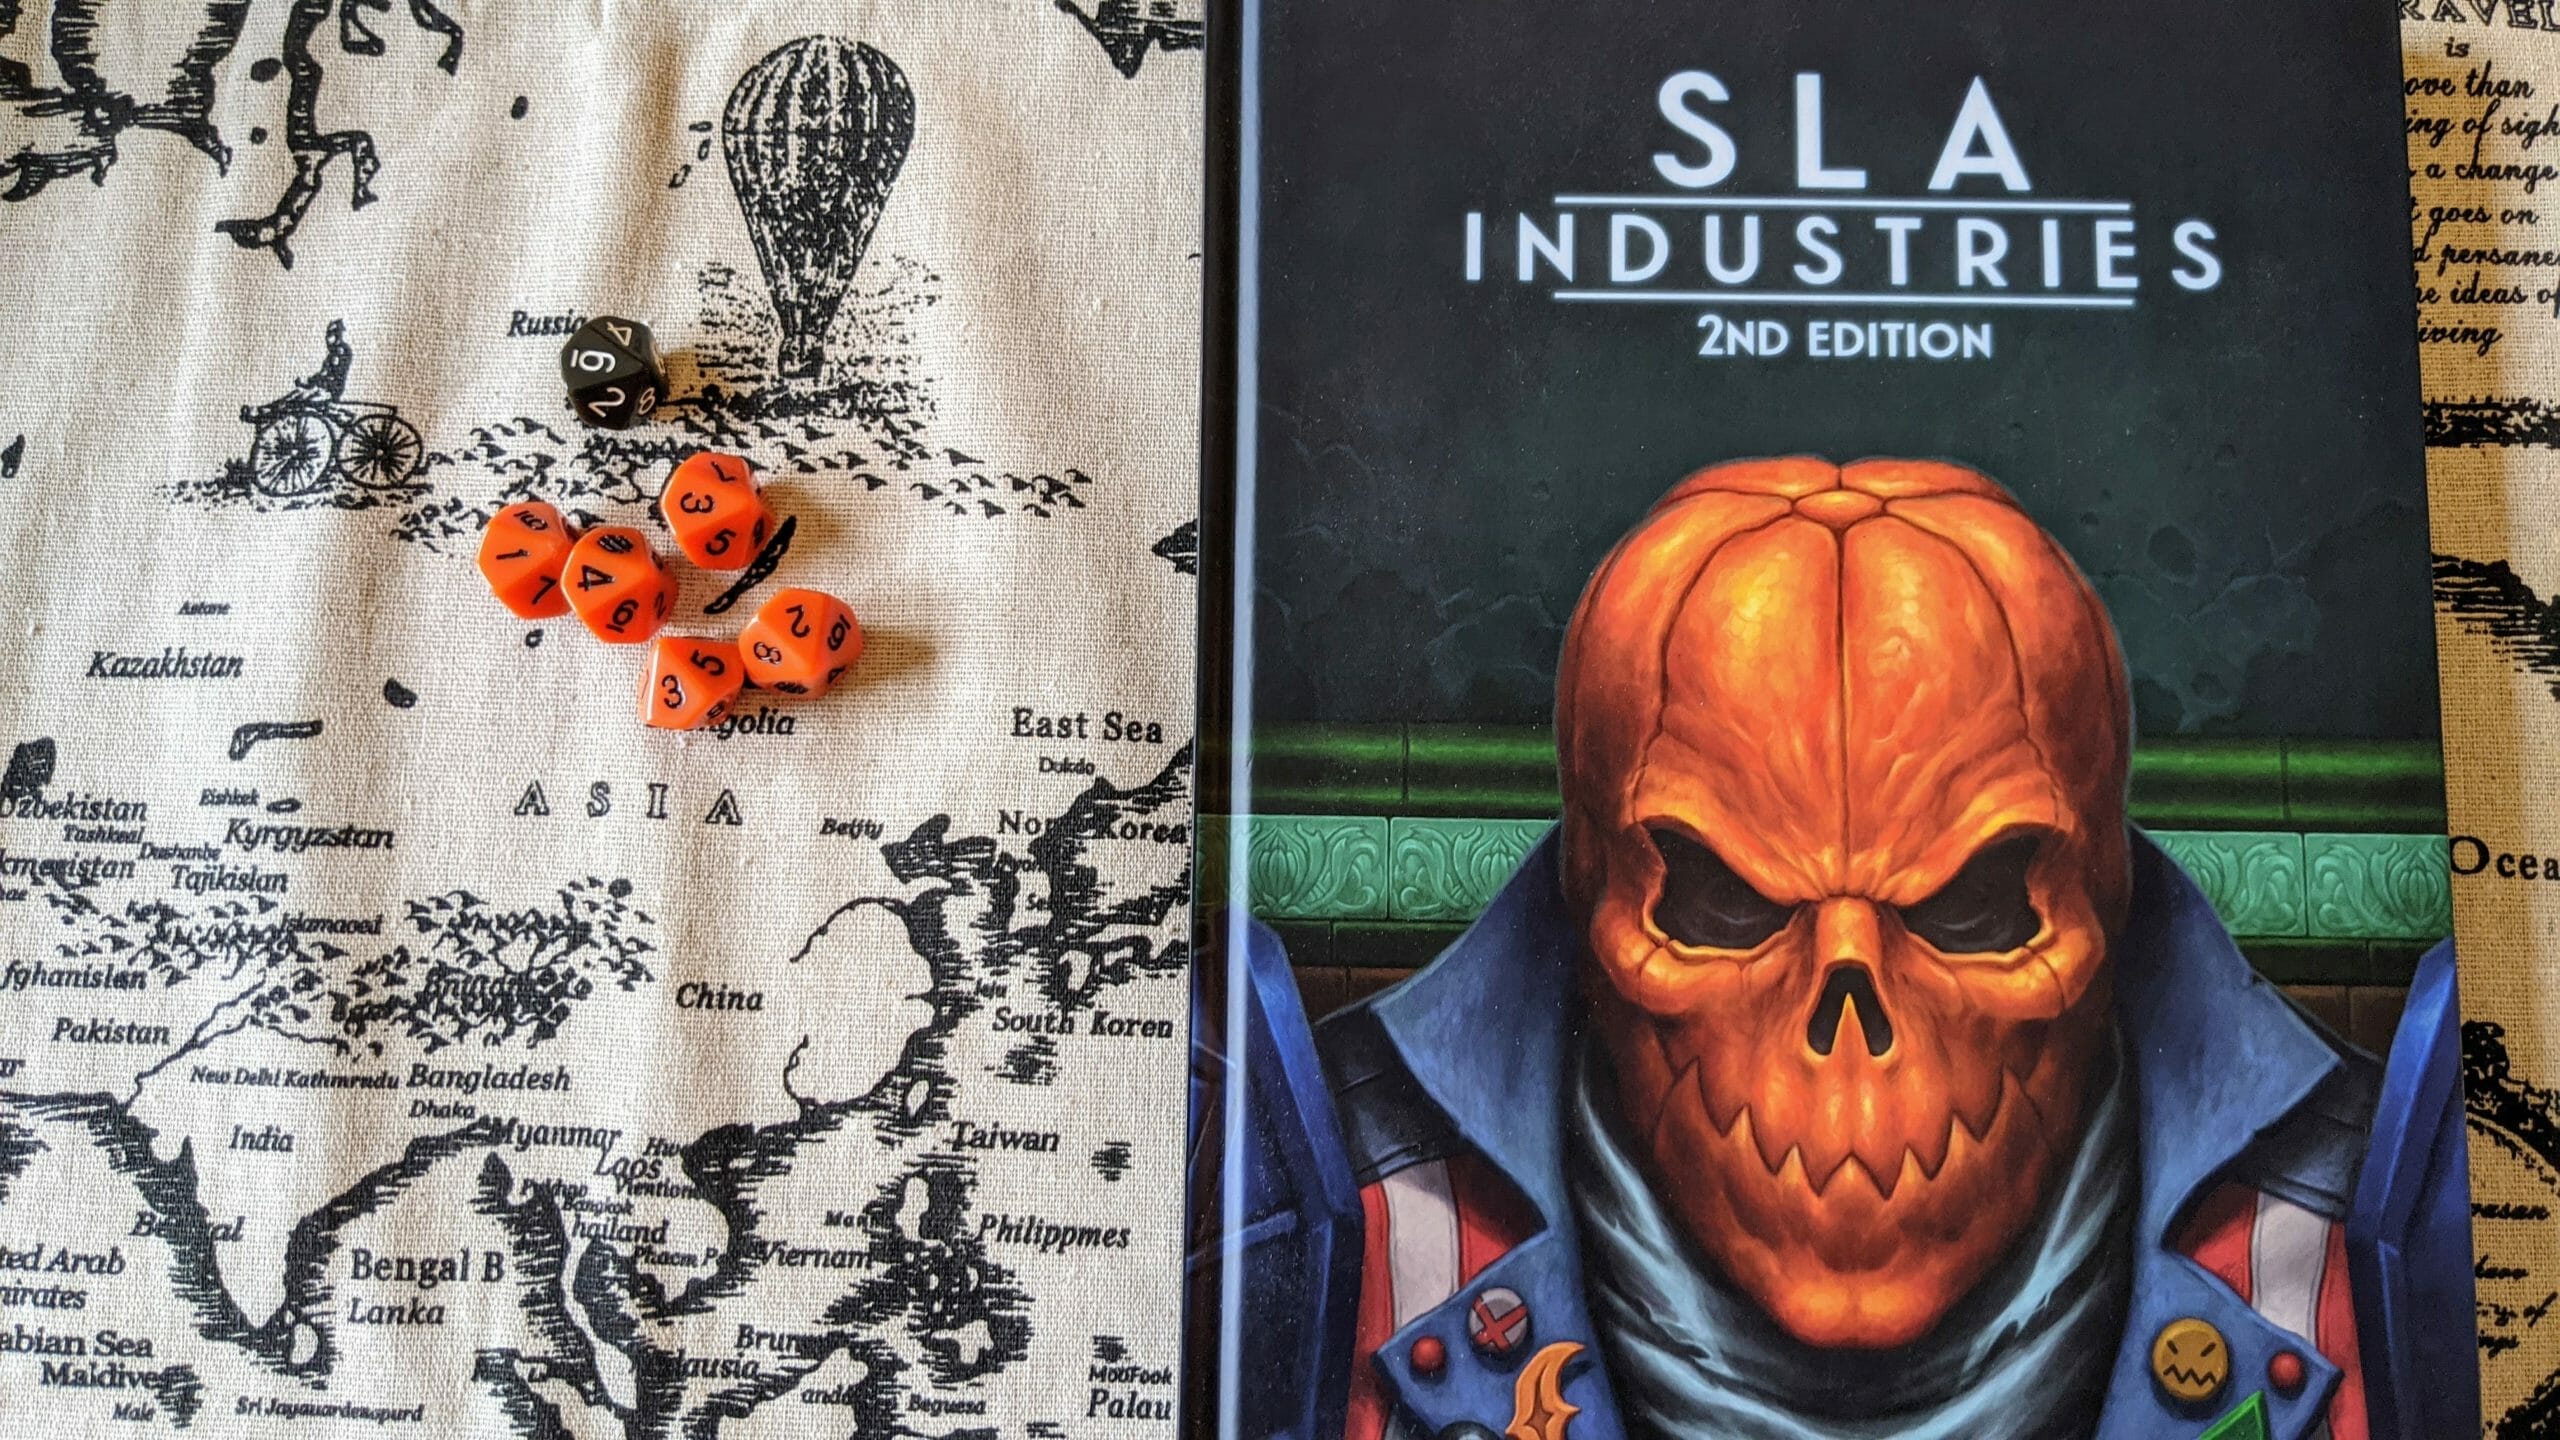 Murder and death for Progress: A review of SLA Industries 2nd edition